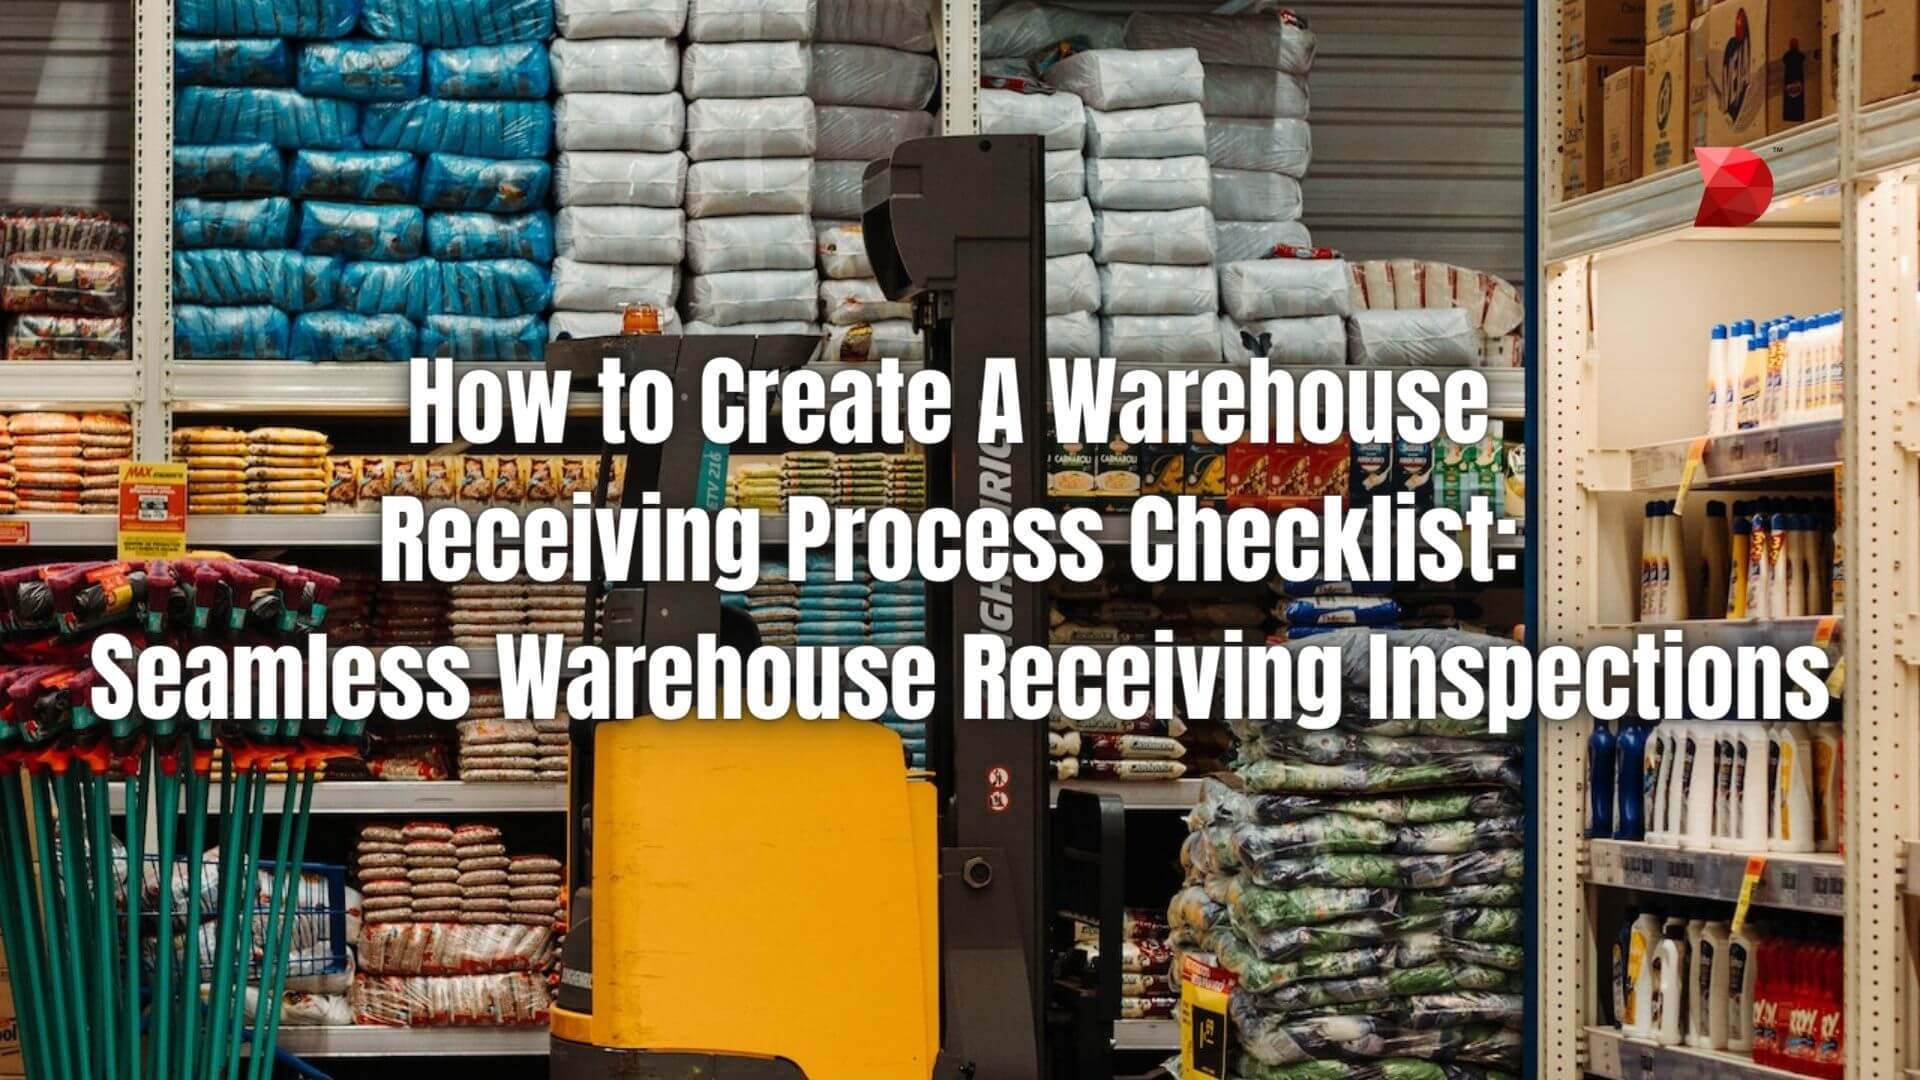 How to Create A Warehouse Receiving Process Checklist Seamless Warehouse Receiving Inspections